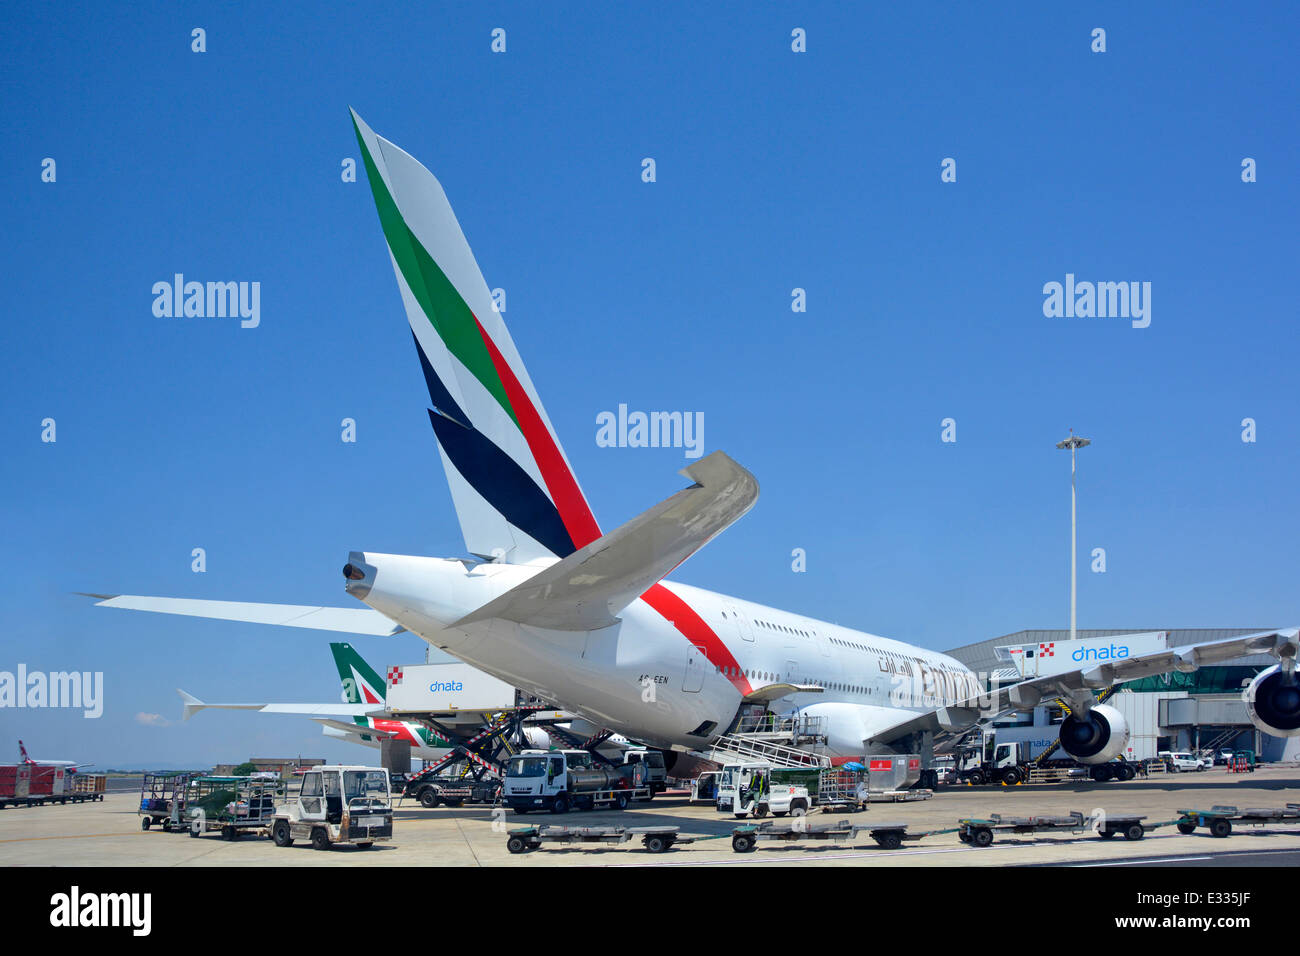 Emirates Airbus A380 double deck wide body four engine jet airplane tail fin logo view at Rome Fiumicino Italy airport apron stand ground crew attend Stock Photo